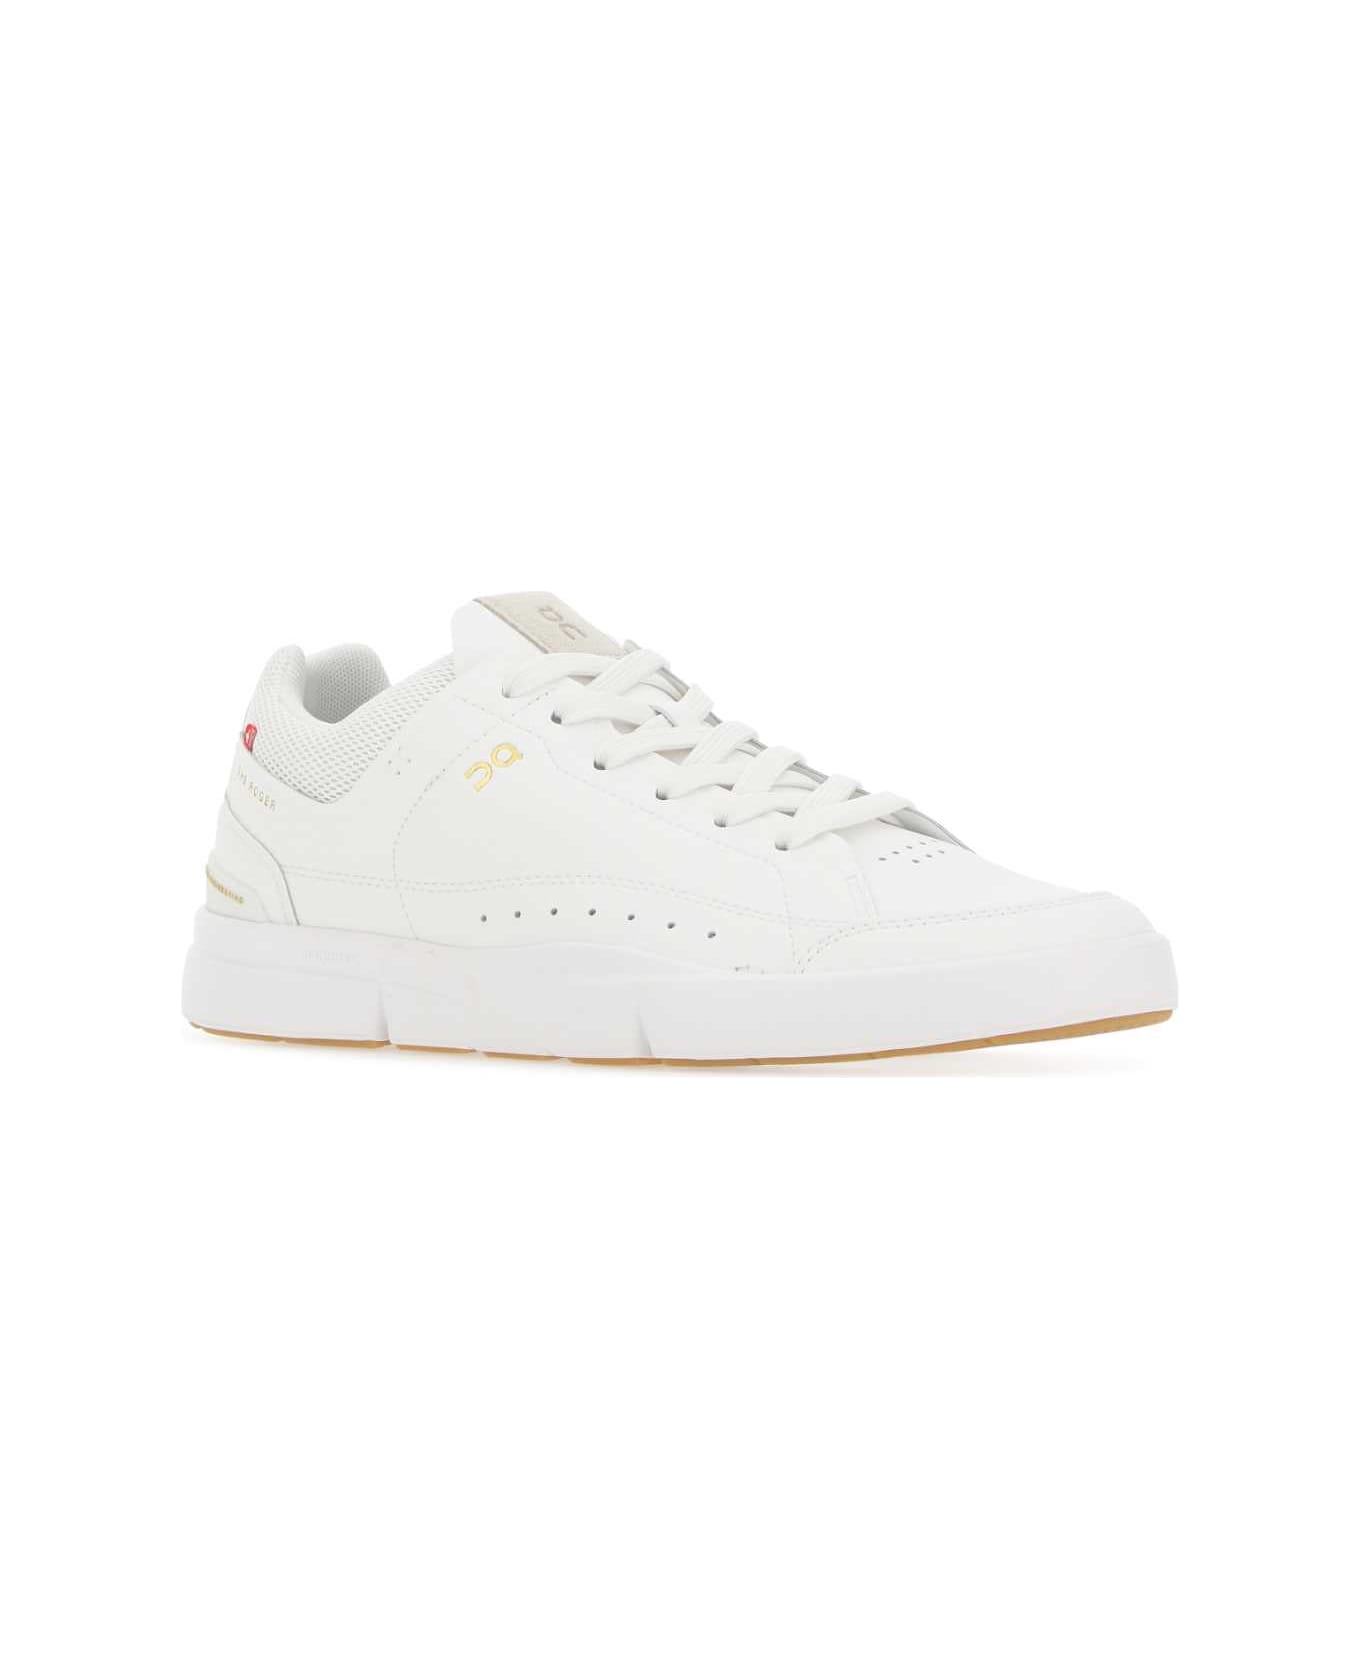 ON White Synthetic Leather And Fabric The Roger Center Court Sneakers - WHITEGUM スニーカー